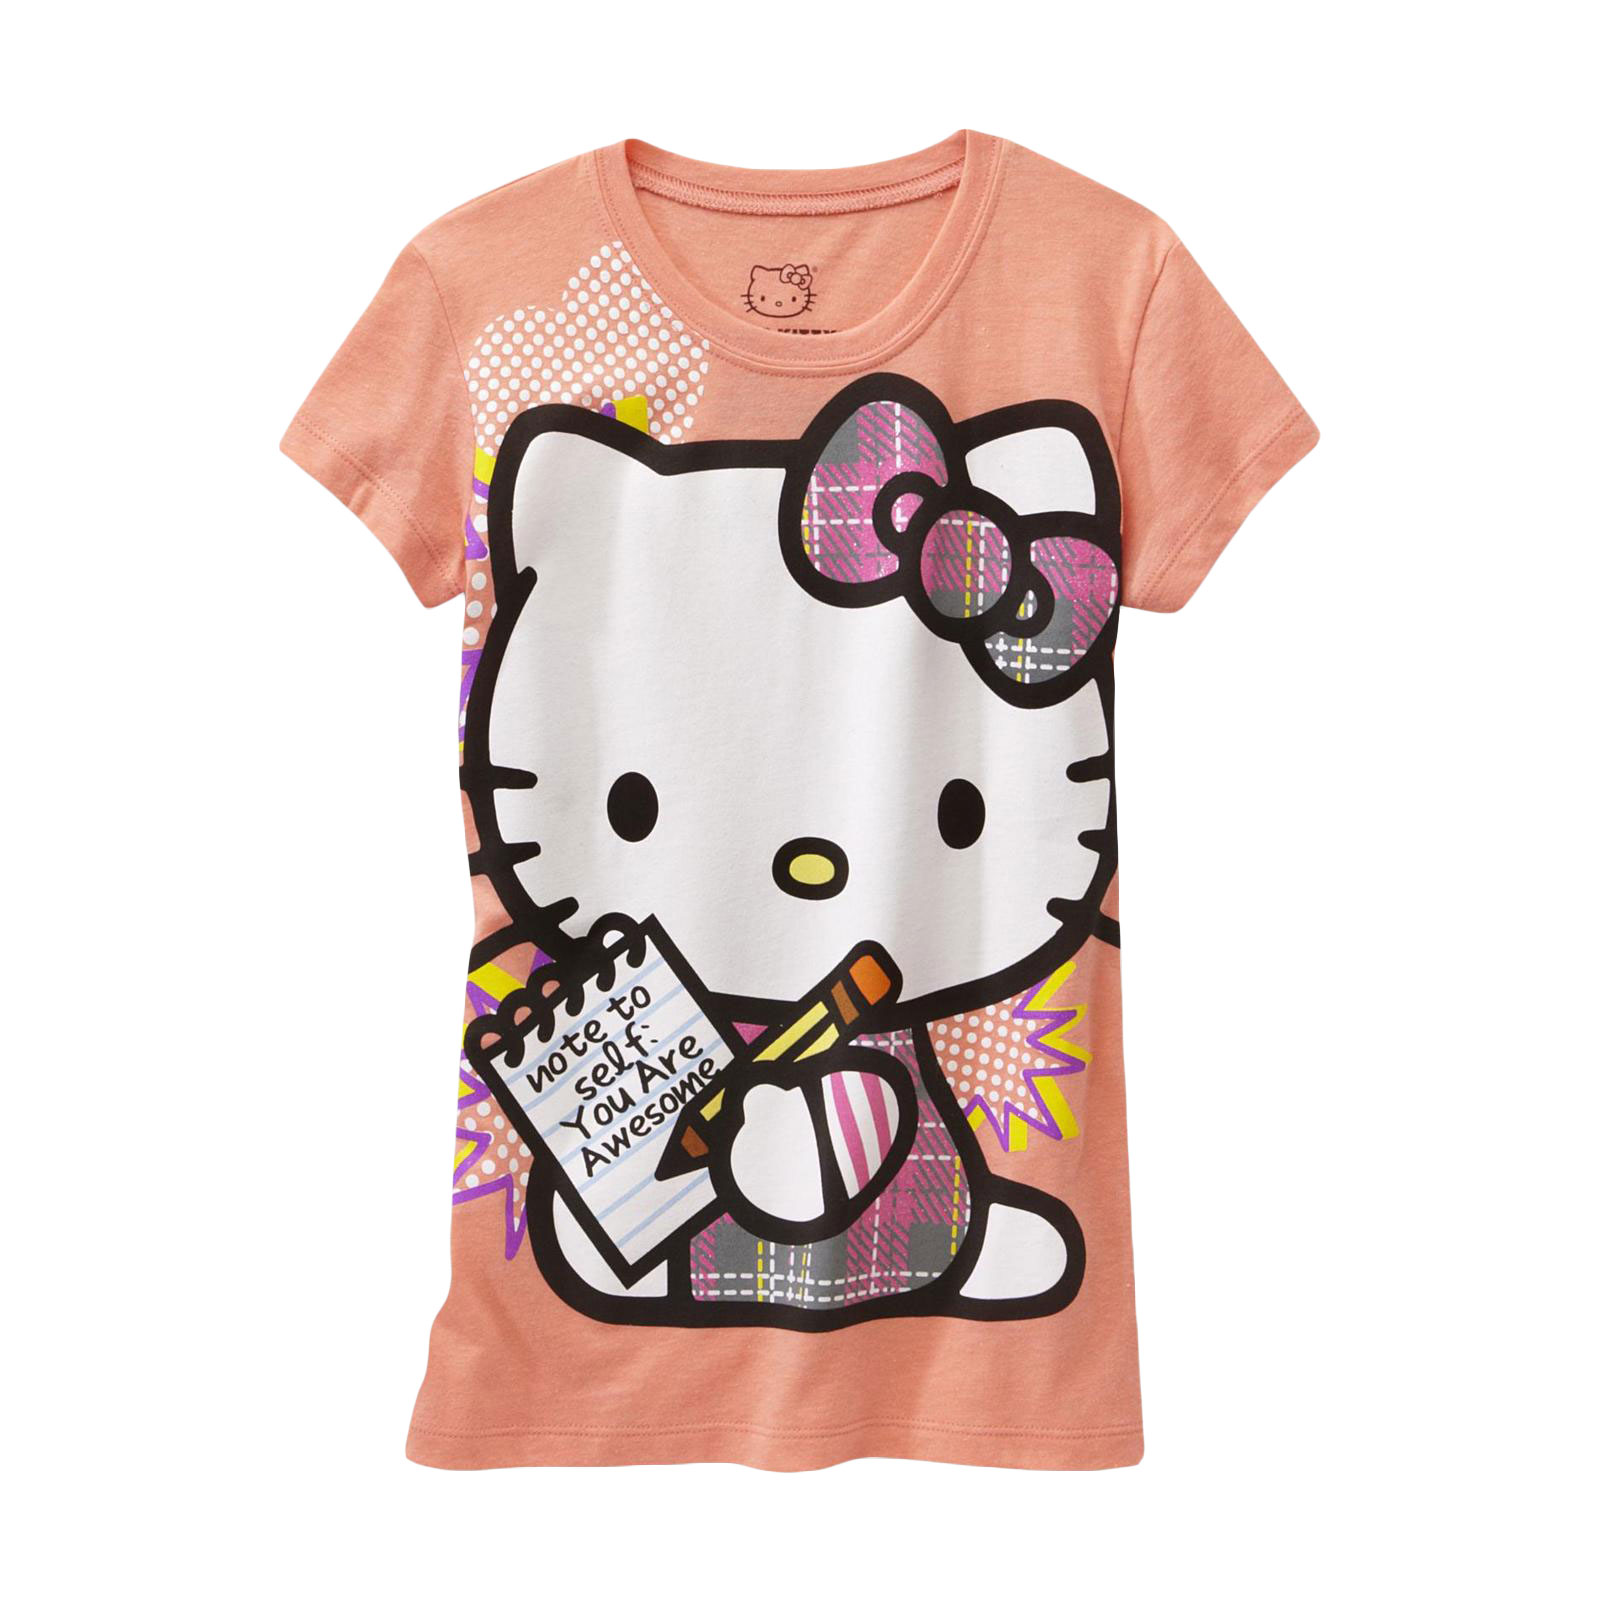 Hello Kitty Girl's Graphic T-Shirt - You Are Awesome